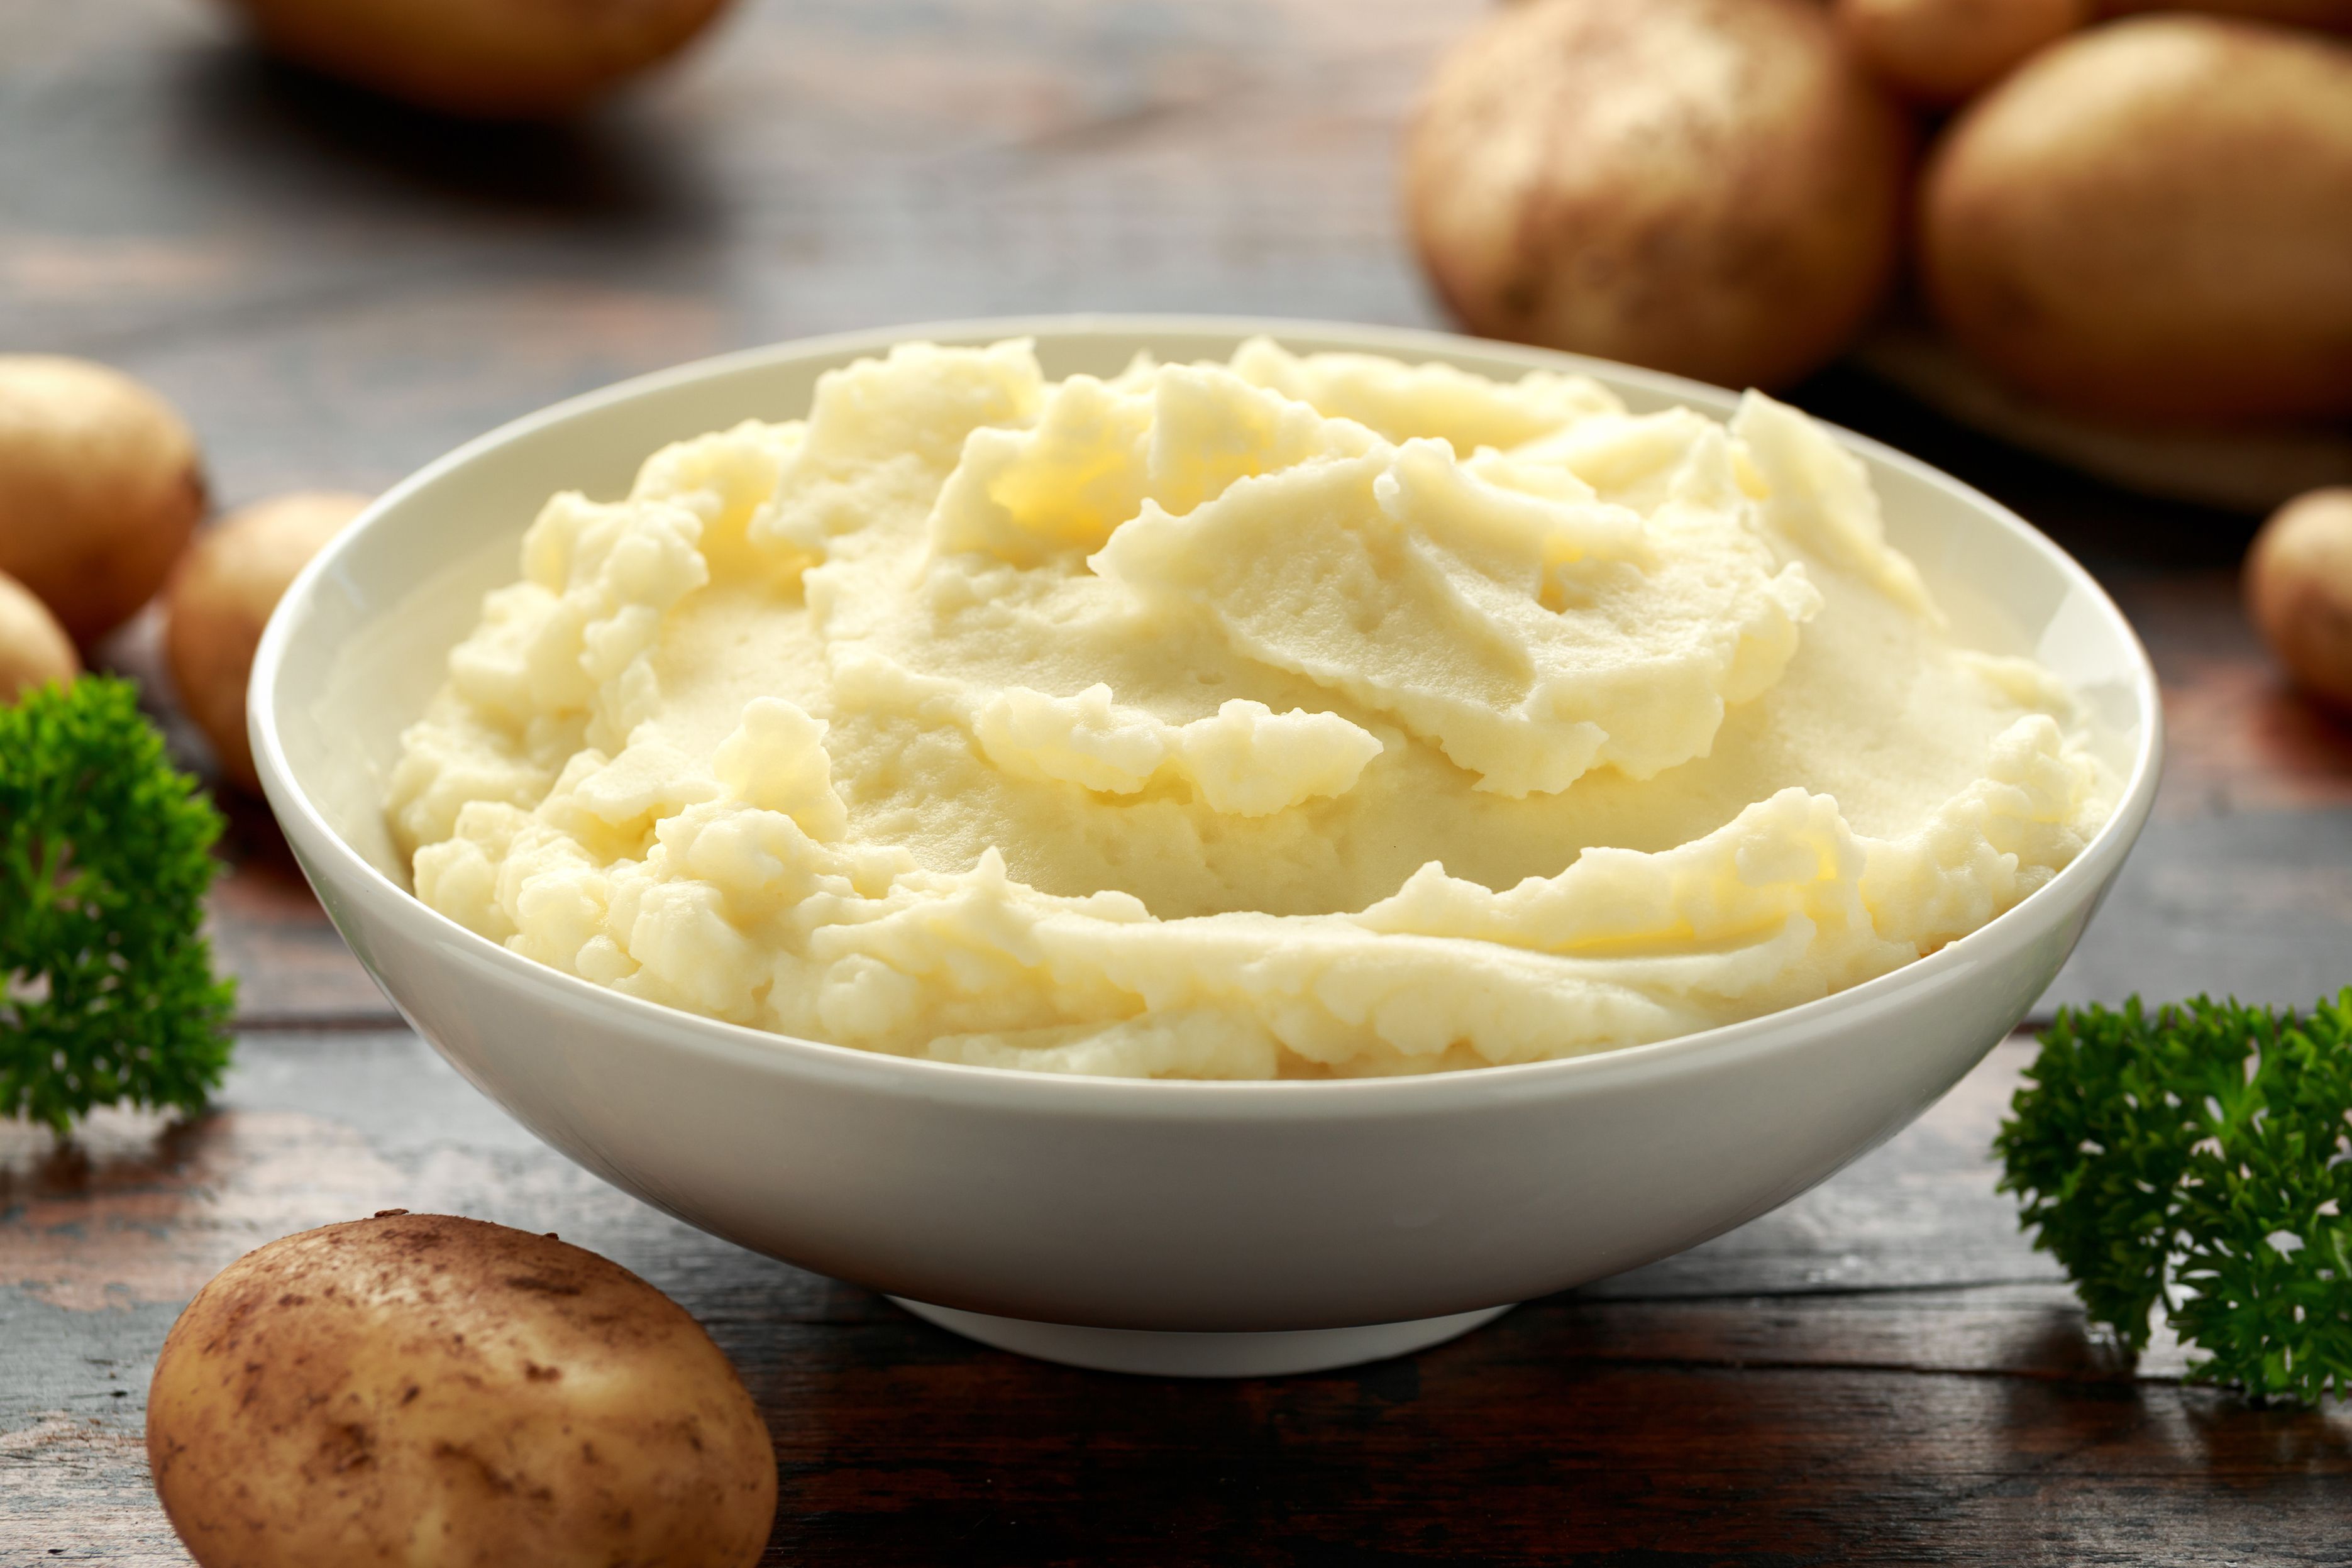 <p>This slow-cooker recipe makes mashed potatoes a convenient dish to prepare, and it can be made plain and simple or with extras like scallions or roasted garlic. The slow cooker keeps the potatoes warm without drying them out, so you can make them ahead of time. </p> <p><b>Recipe:</b> <a href="https://www.thekitchn.com/how-to-make-mashed-potatoes-in-the-slow-cooker-cooking-lessons-from-the-kitchn-212550">The Kitchn</a></p>